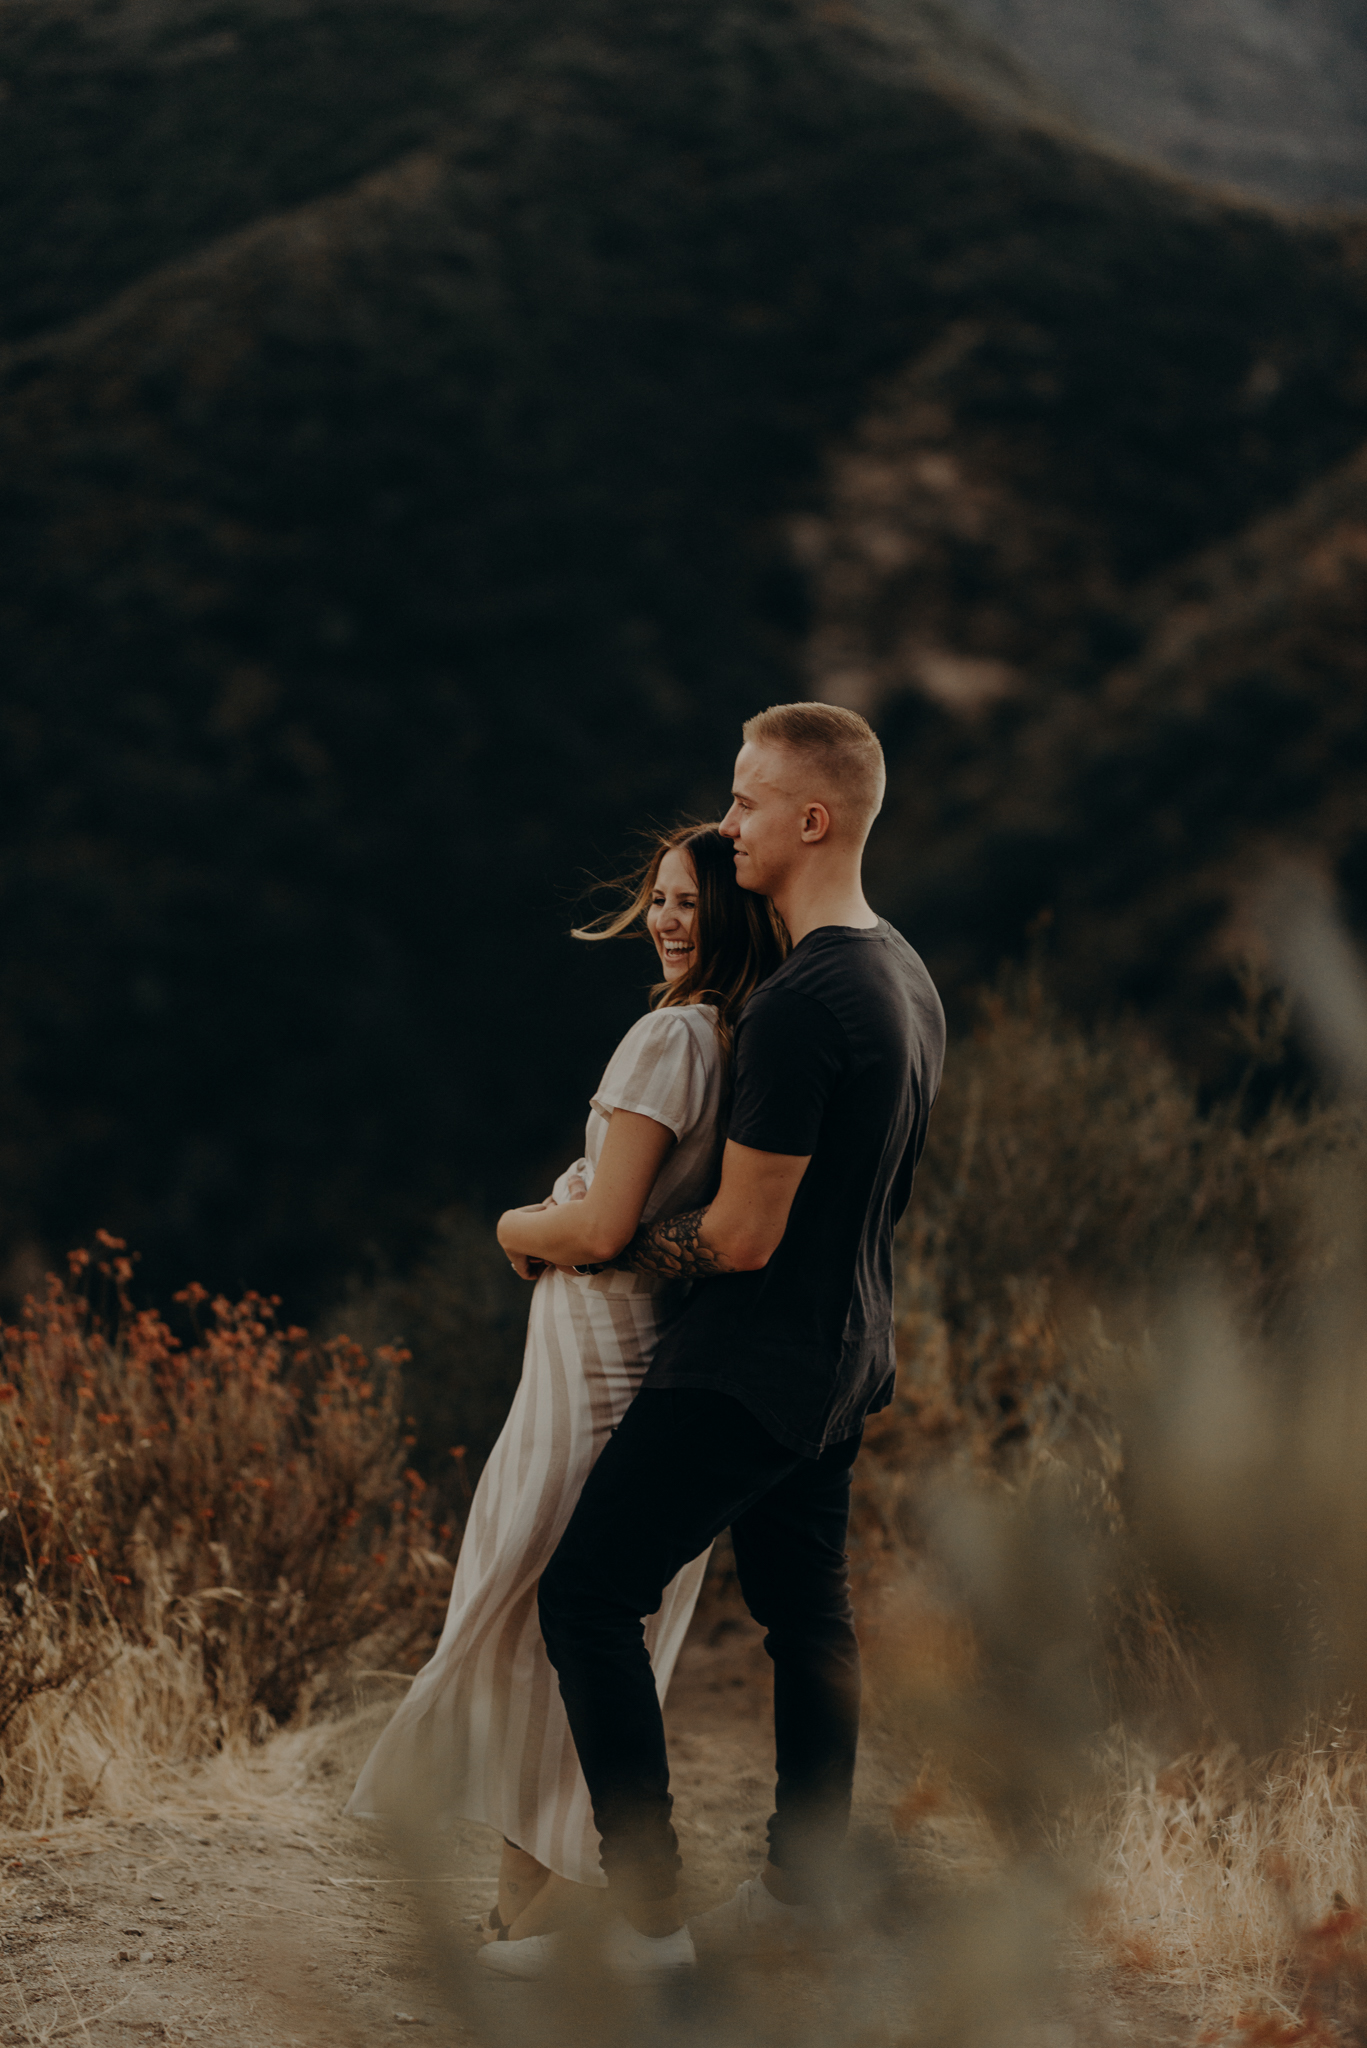 Isaiah + Taylor Photography - Los Angeles Forest Engagement Session - Laid back wedding photographer-028.jpg